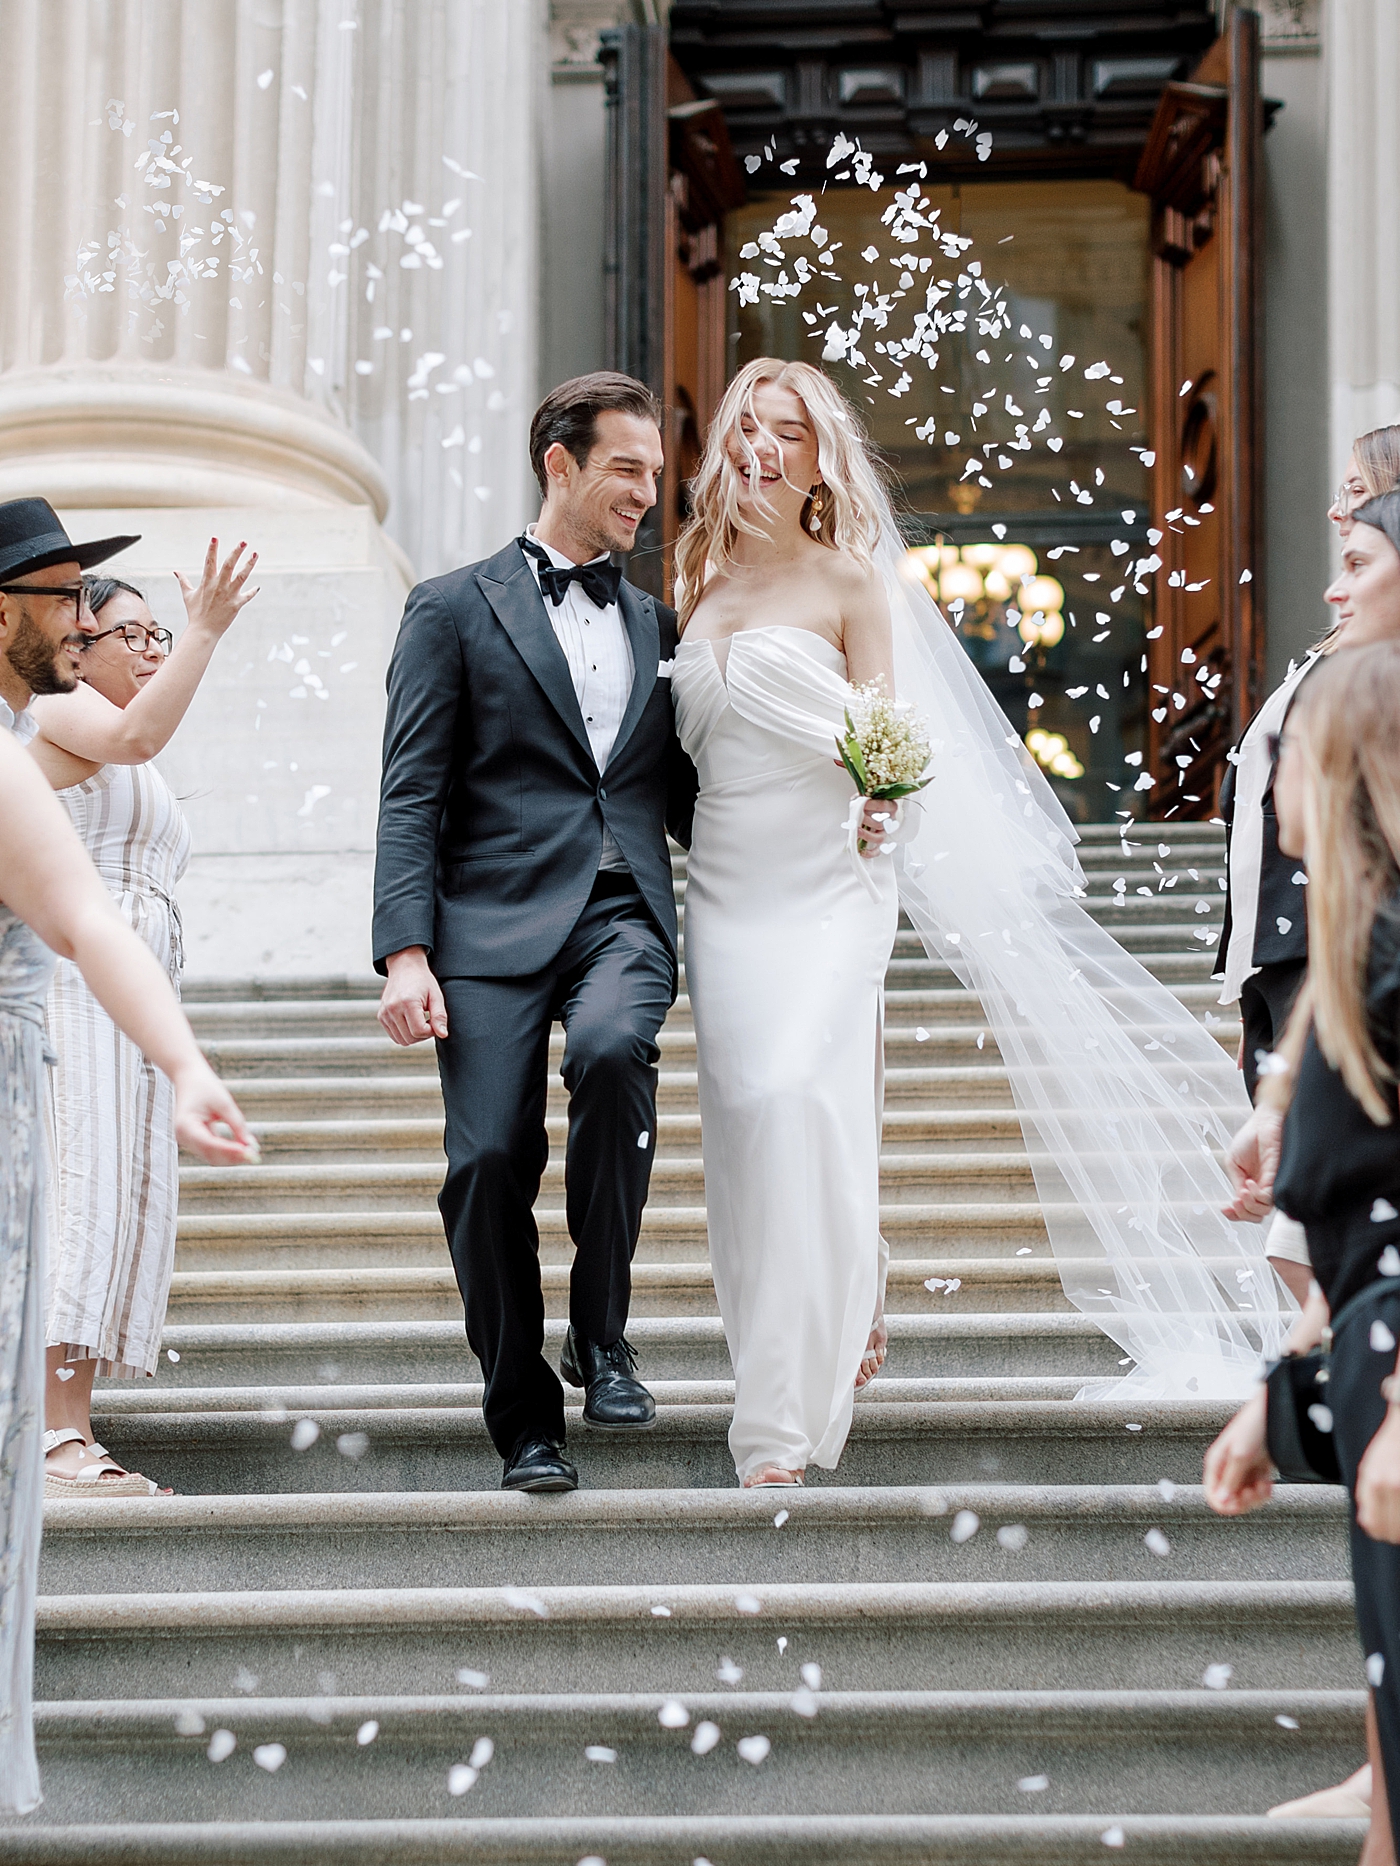 Bride and groom exiting their wedding through confetti | Photo by NYC Wedding Photographer Hope Helmuth 